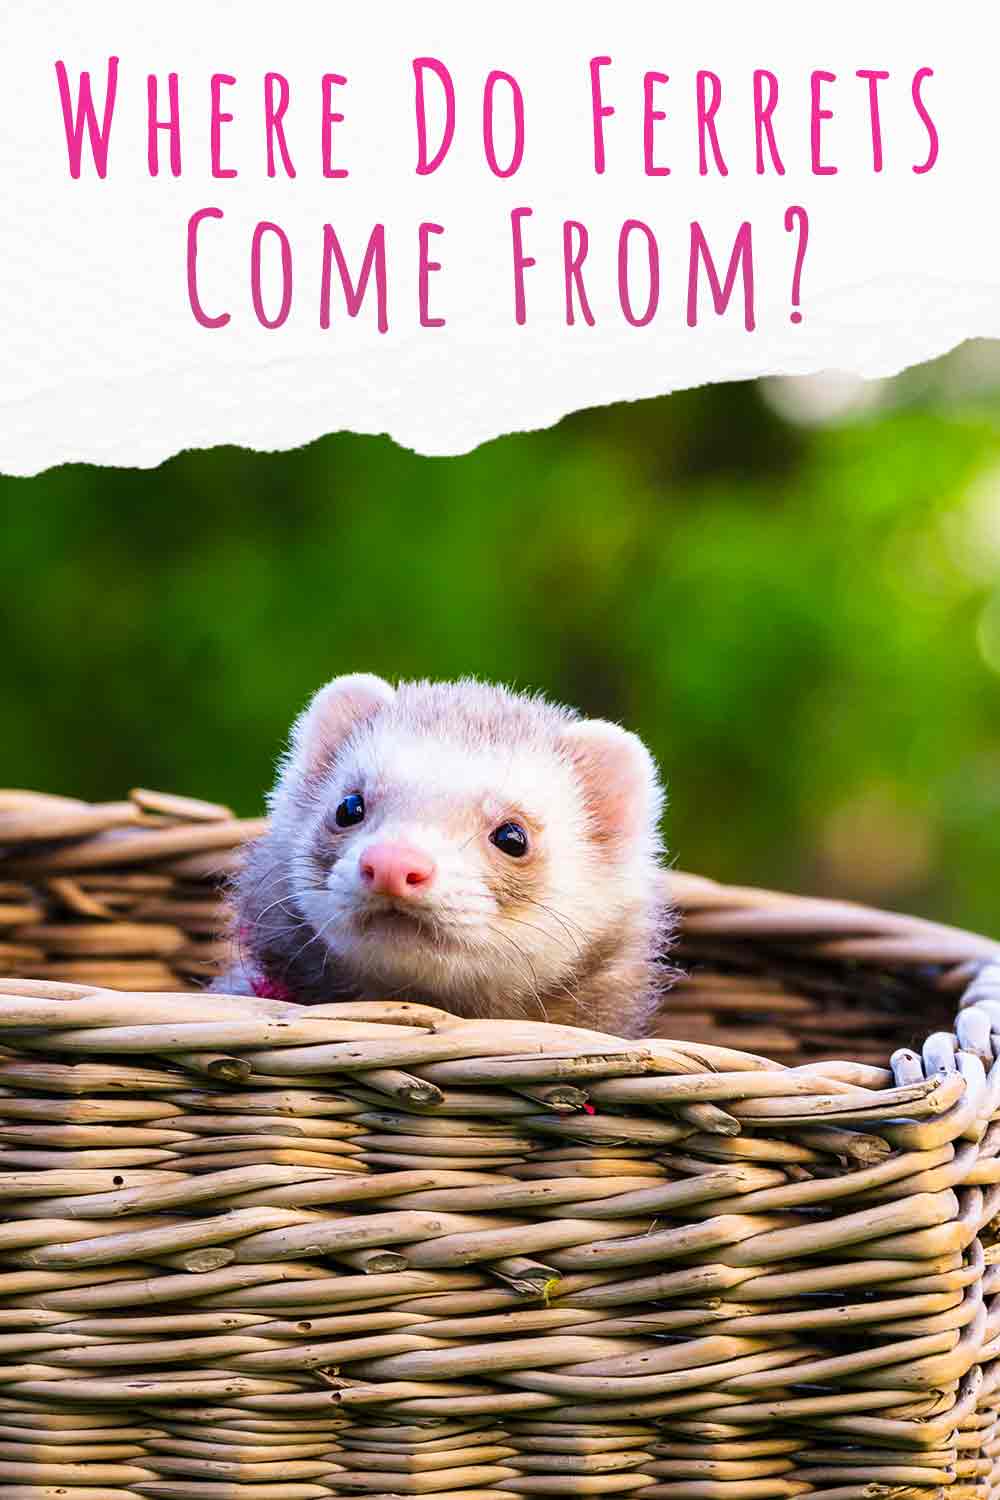 where do Ferrets come from?